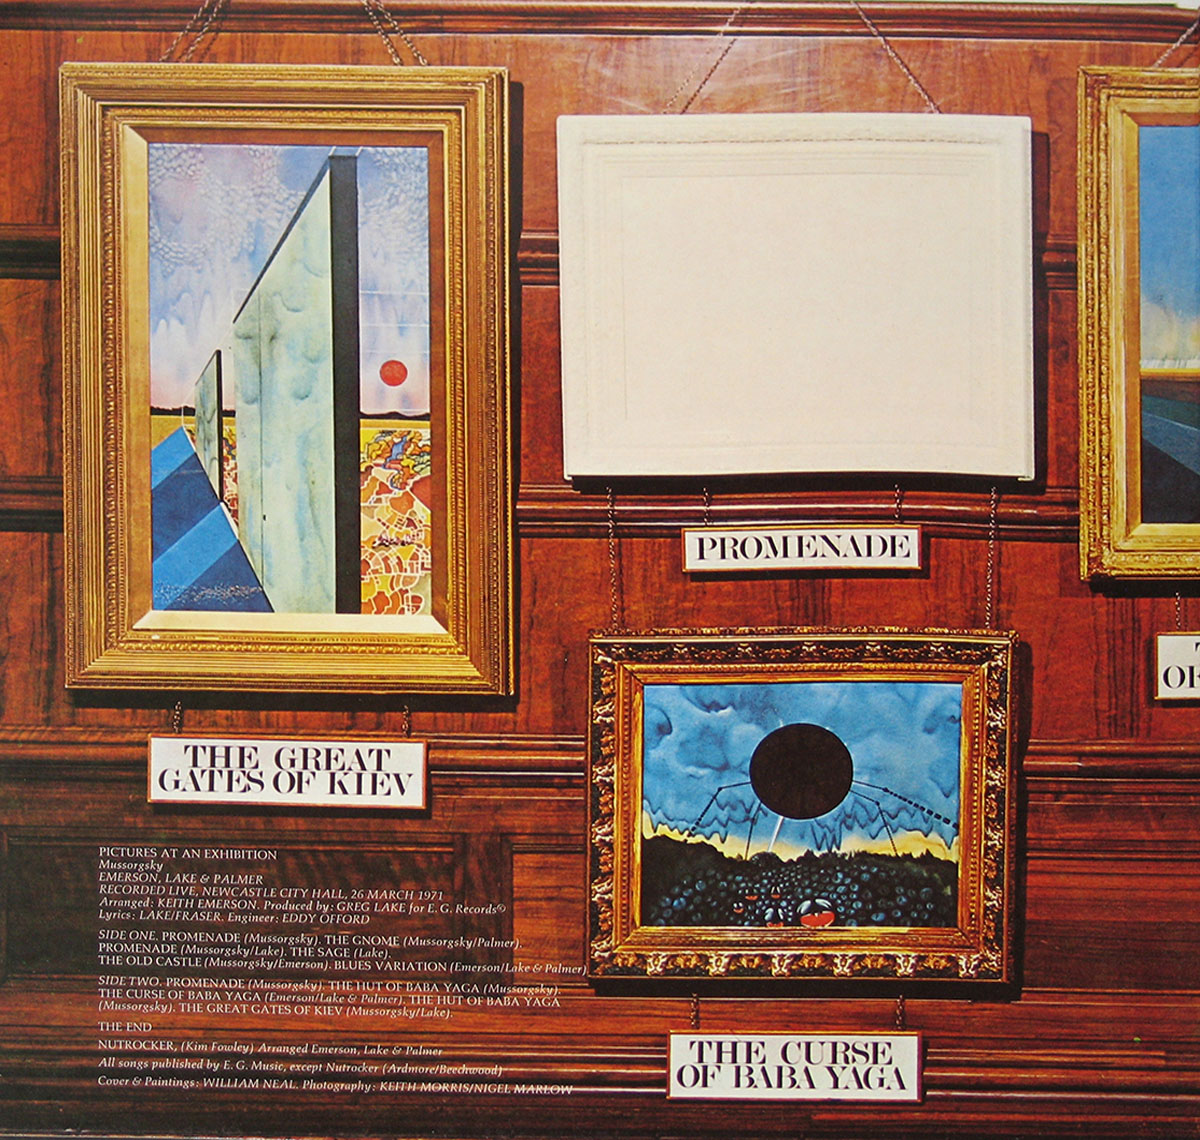 High Resolution Photo elp emerson lake palmer pictures exhibition eec 